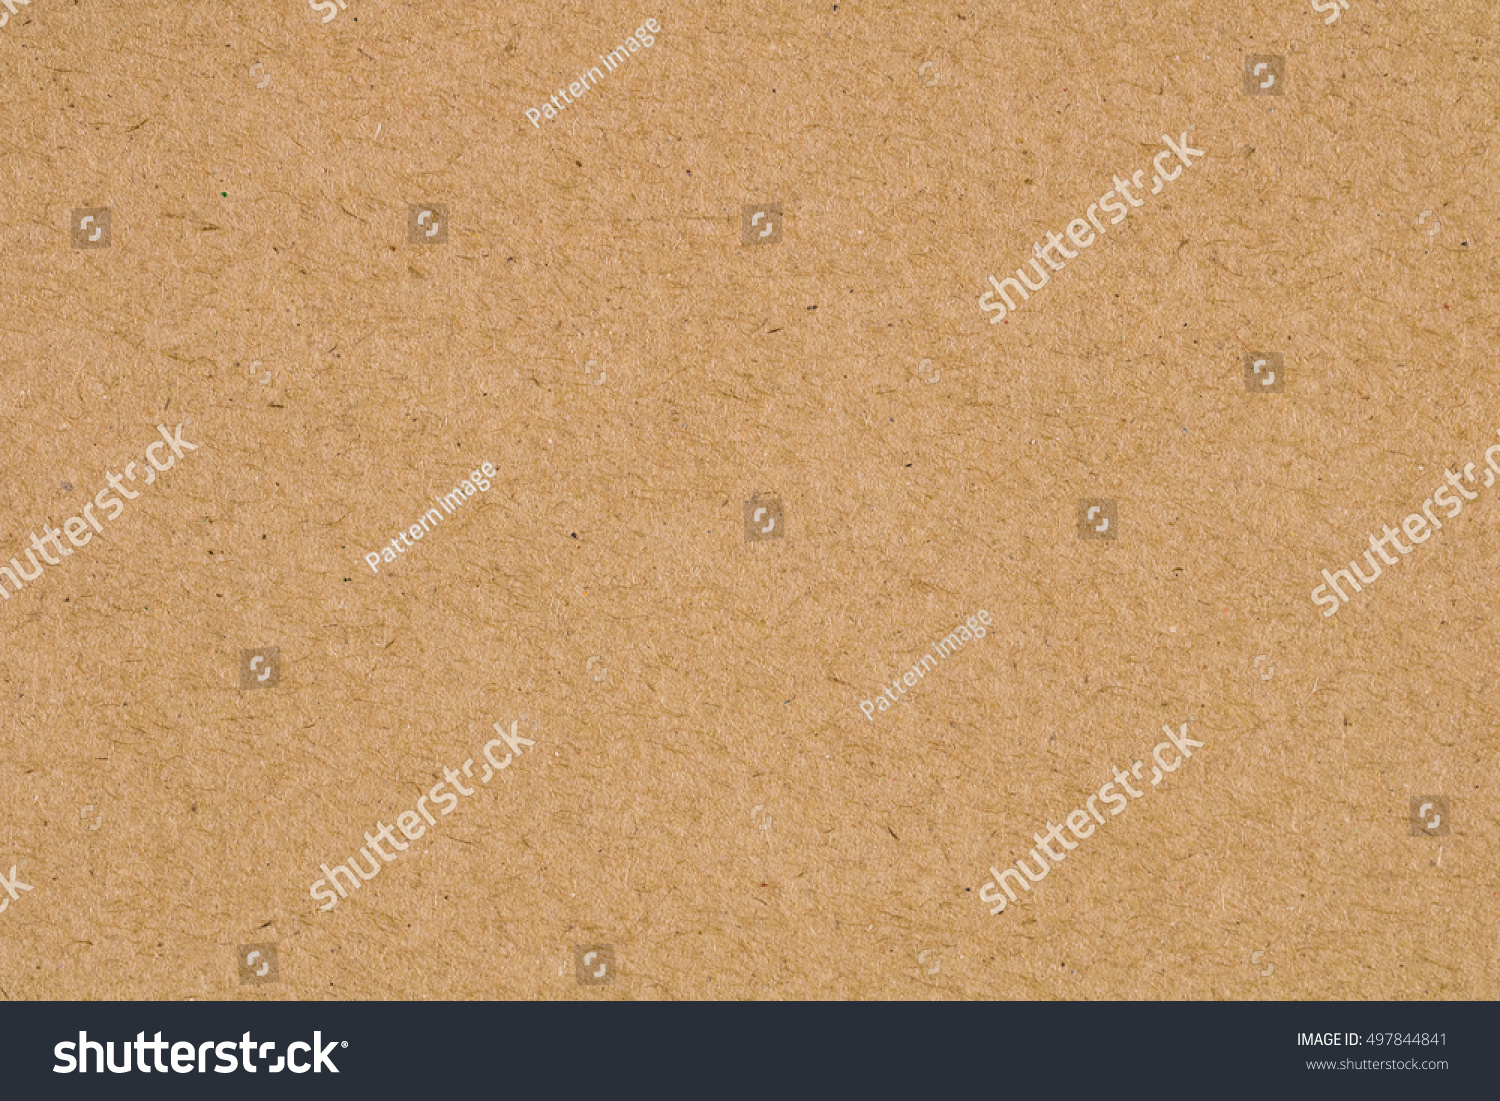 Brown paper close-up #497844841